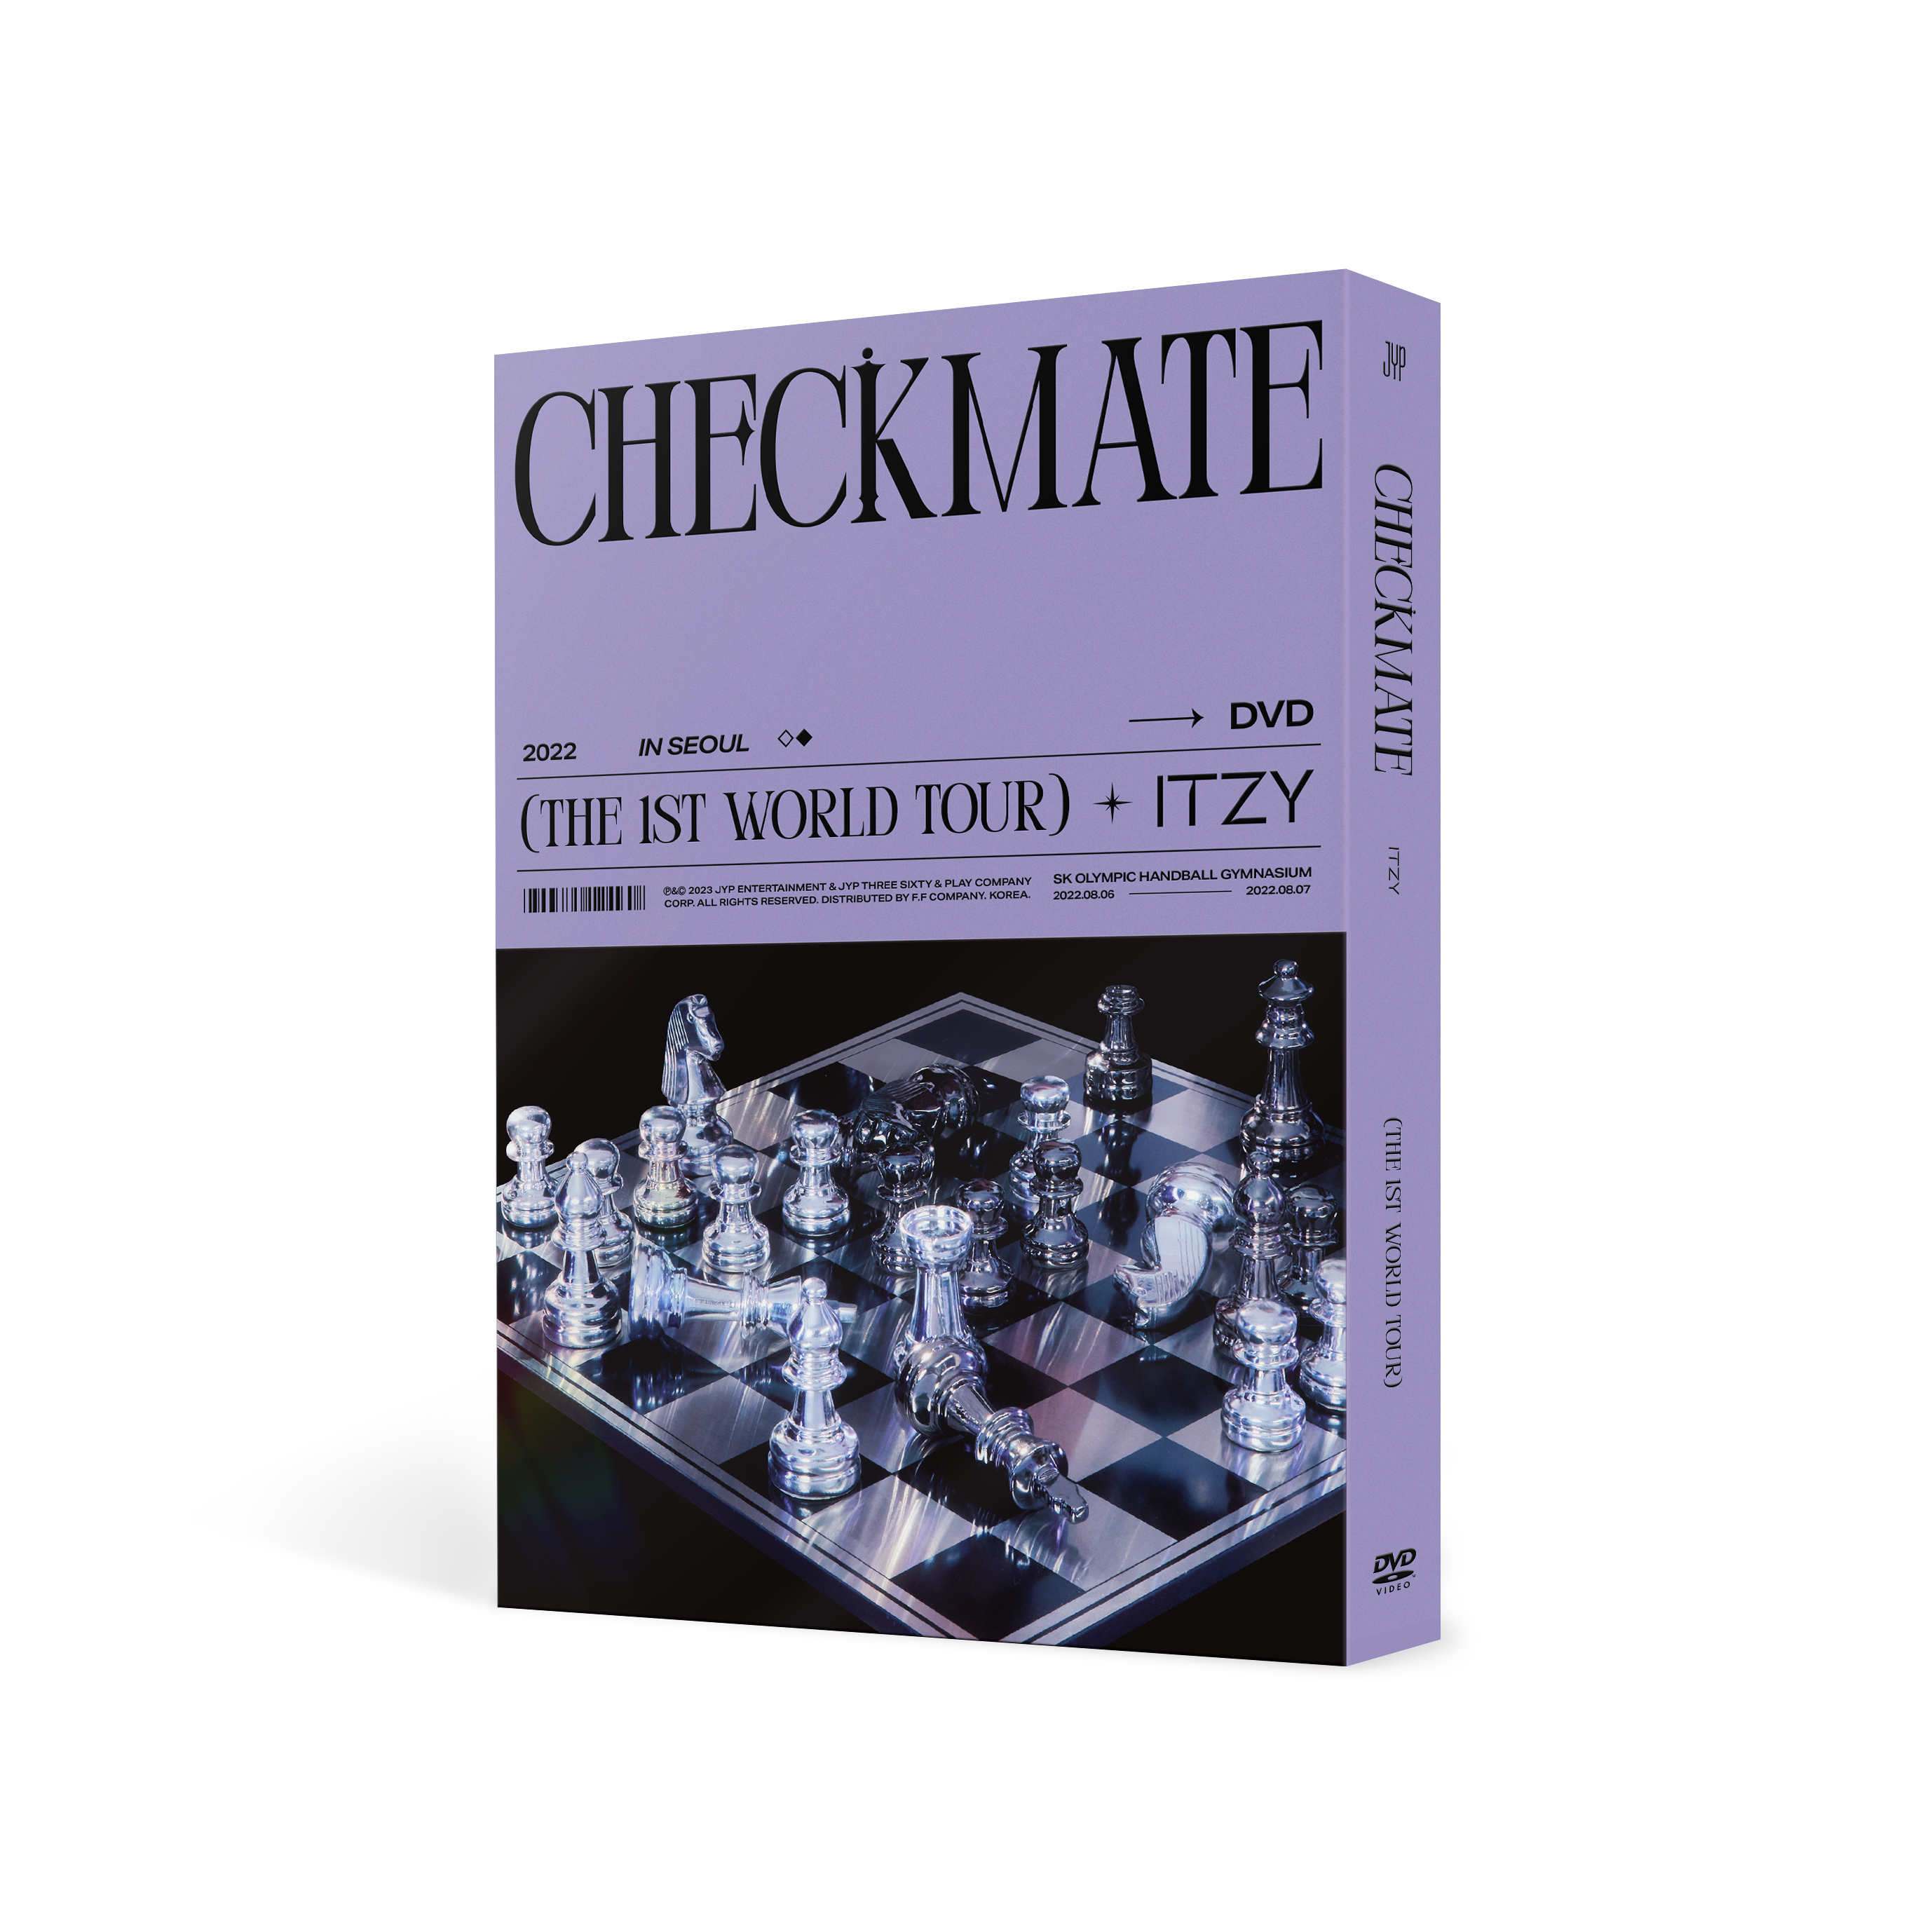 jp.ktown4u.com : ITZY - 2022 ITZY THE 1ST WORLD TOUR [CHECKMATE 